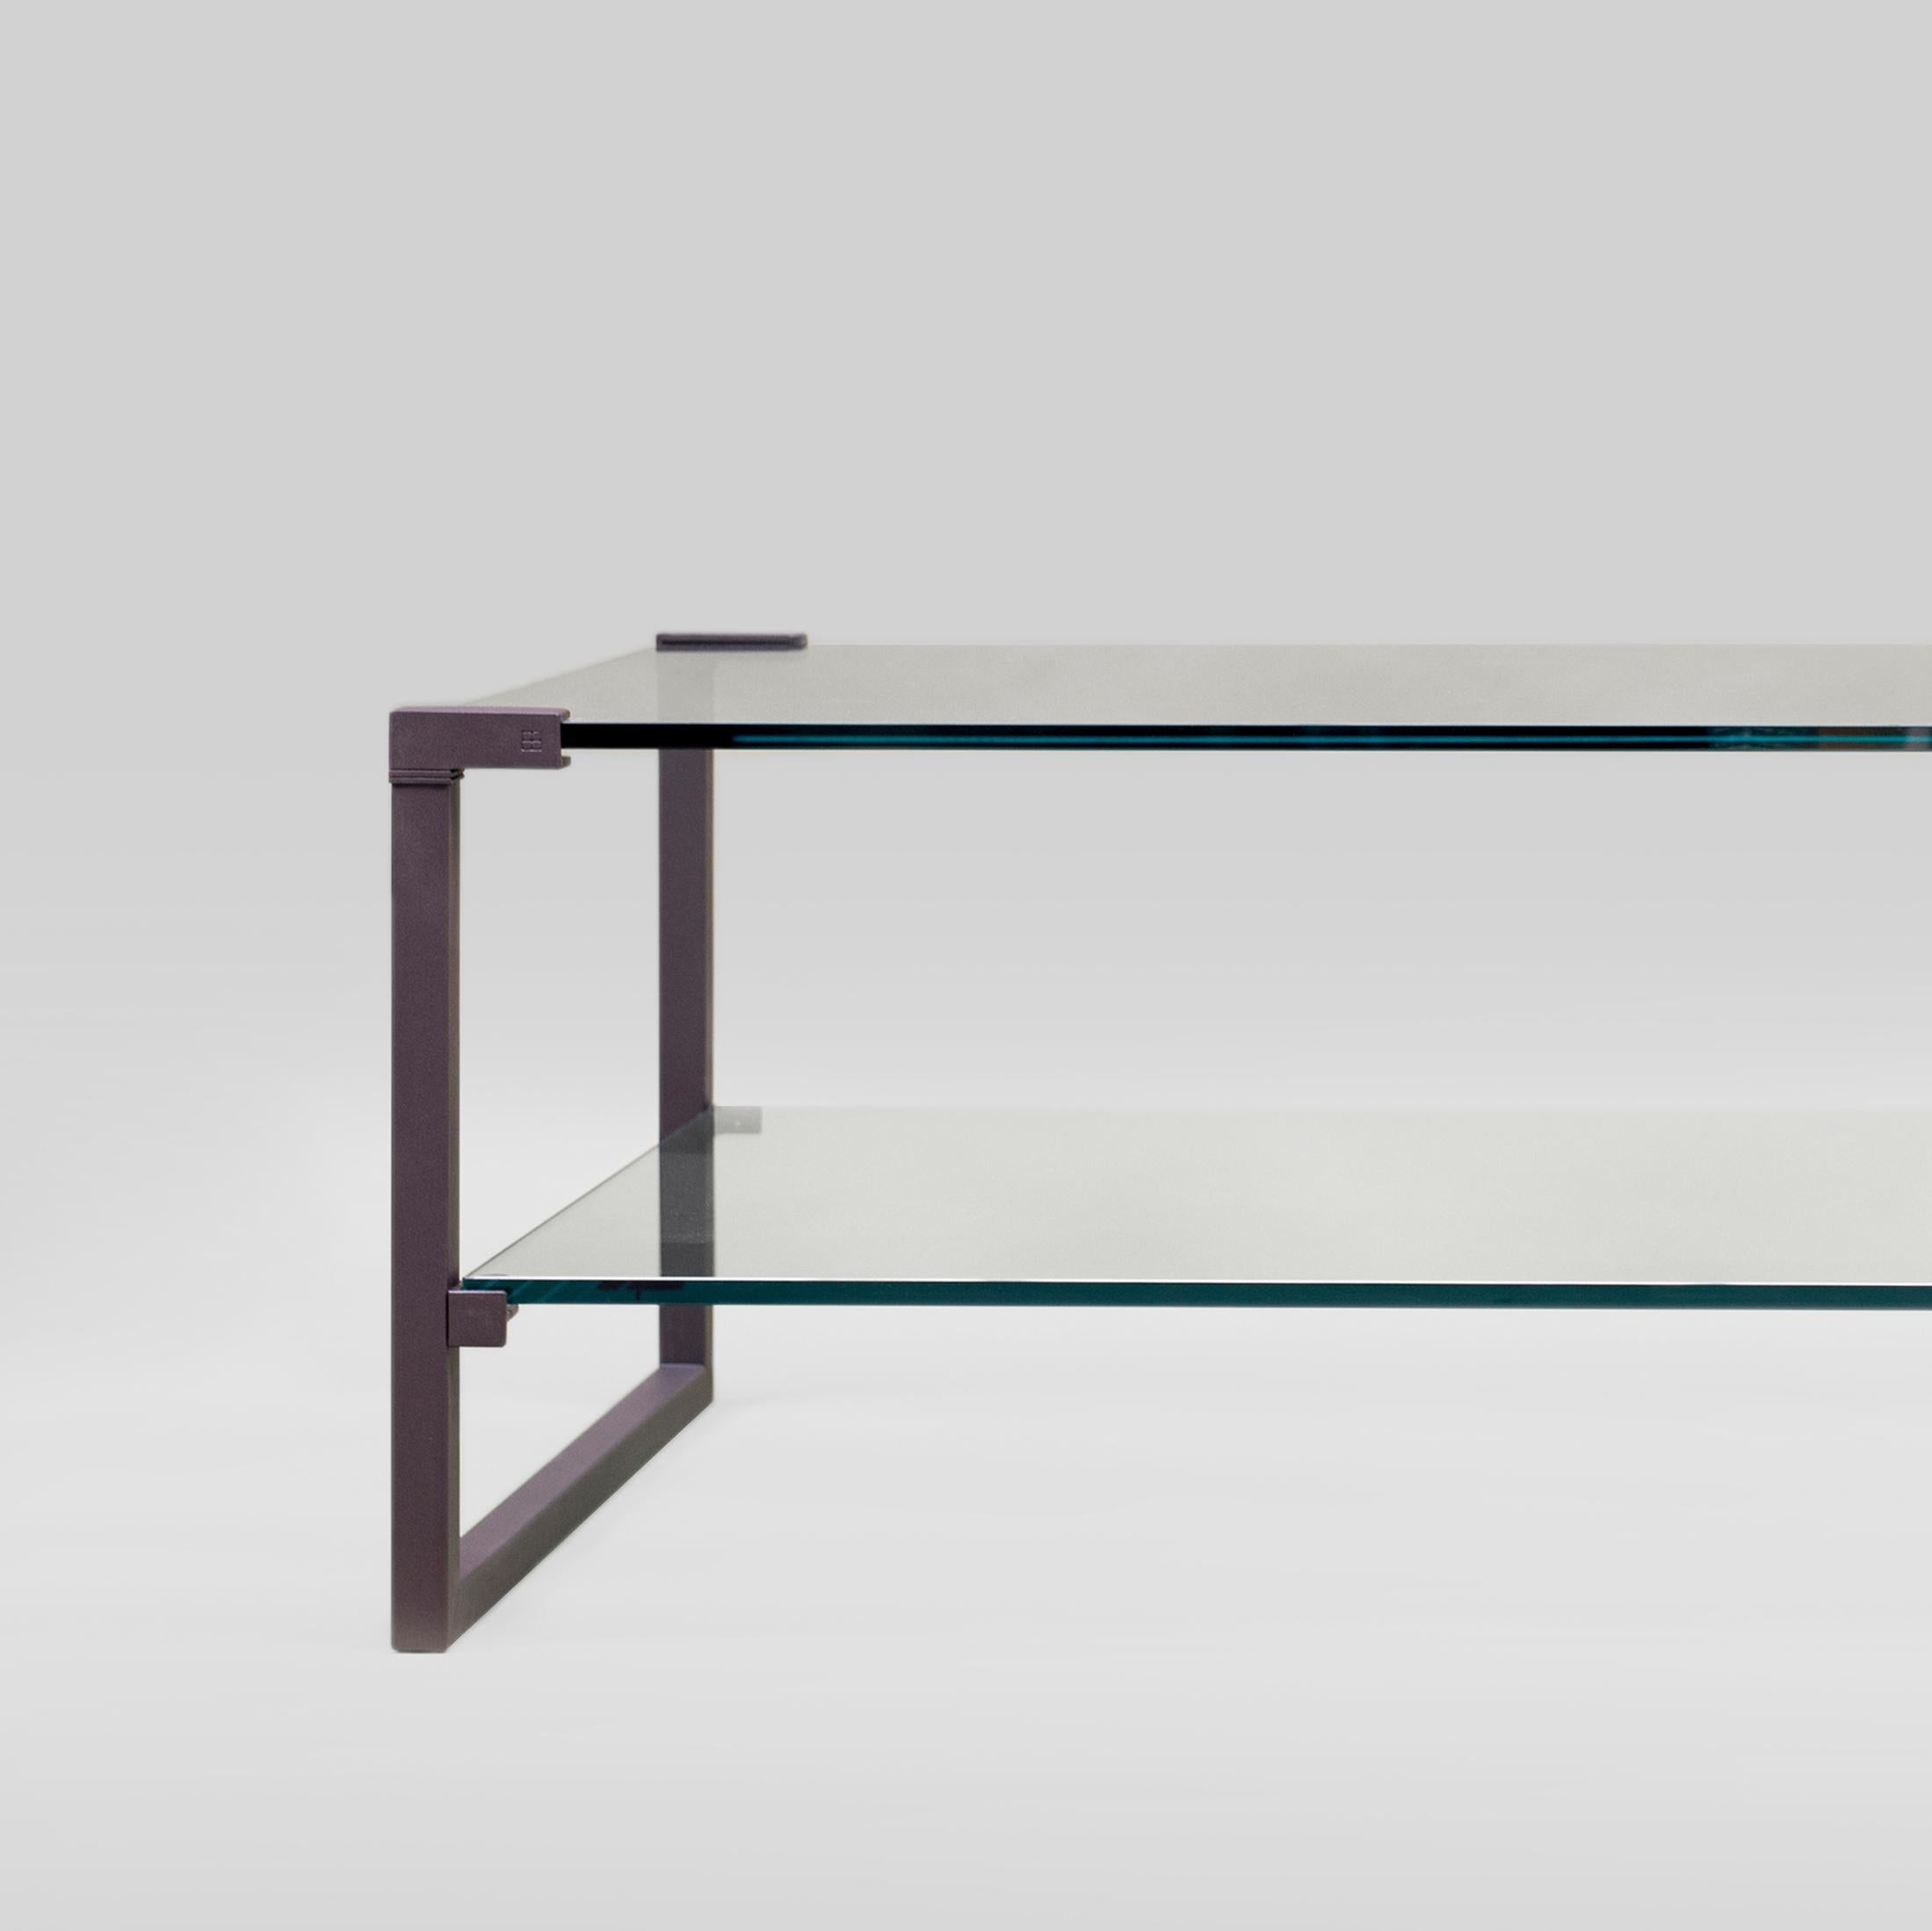 Table designed by Peter Ghyczy.
Manufactured by Ghyczy (Netherlands)

The twin frames are constructed of 3 × 3 square tubes and secured to the tabletop by cast metal details. The strong construction makes this table versatile, fitting every